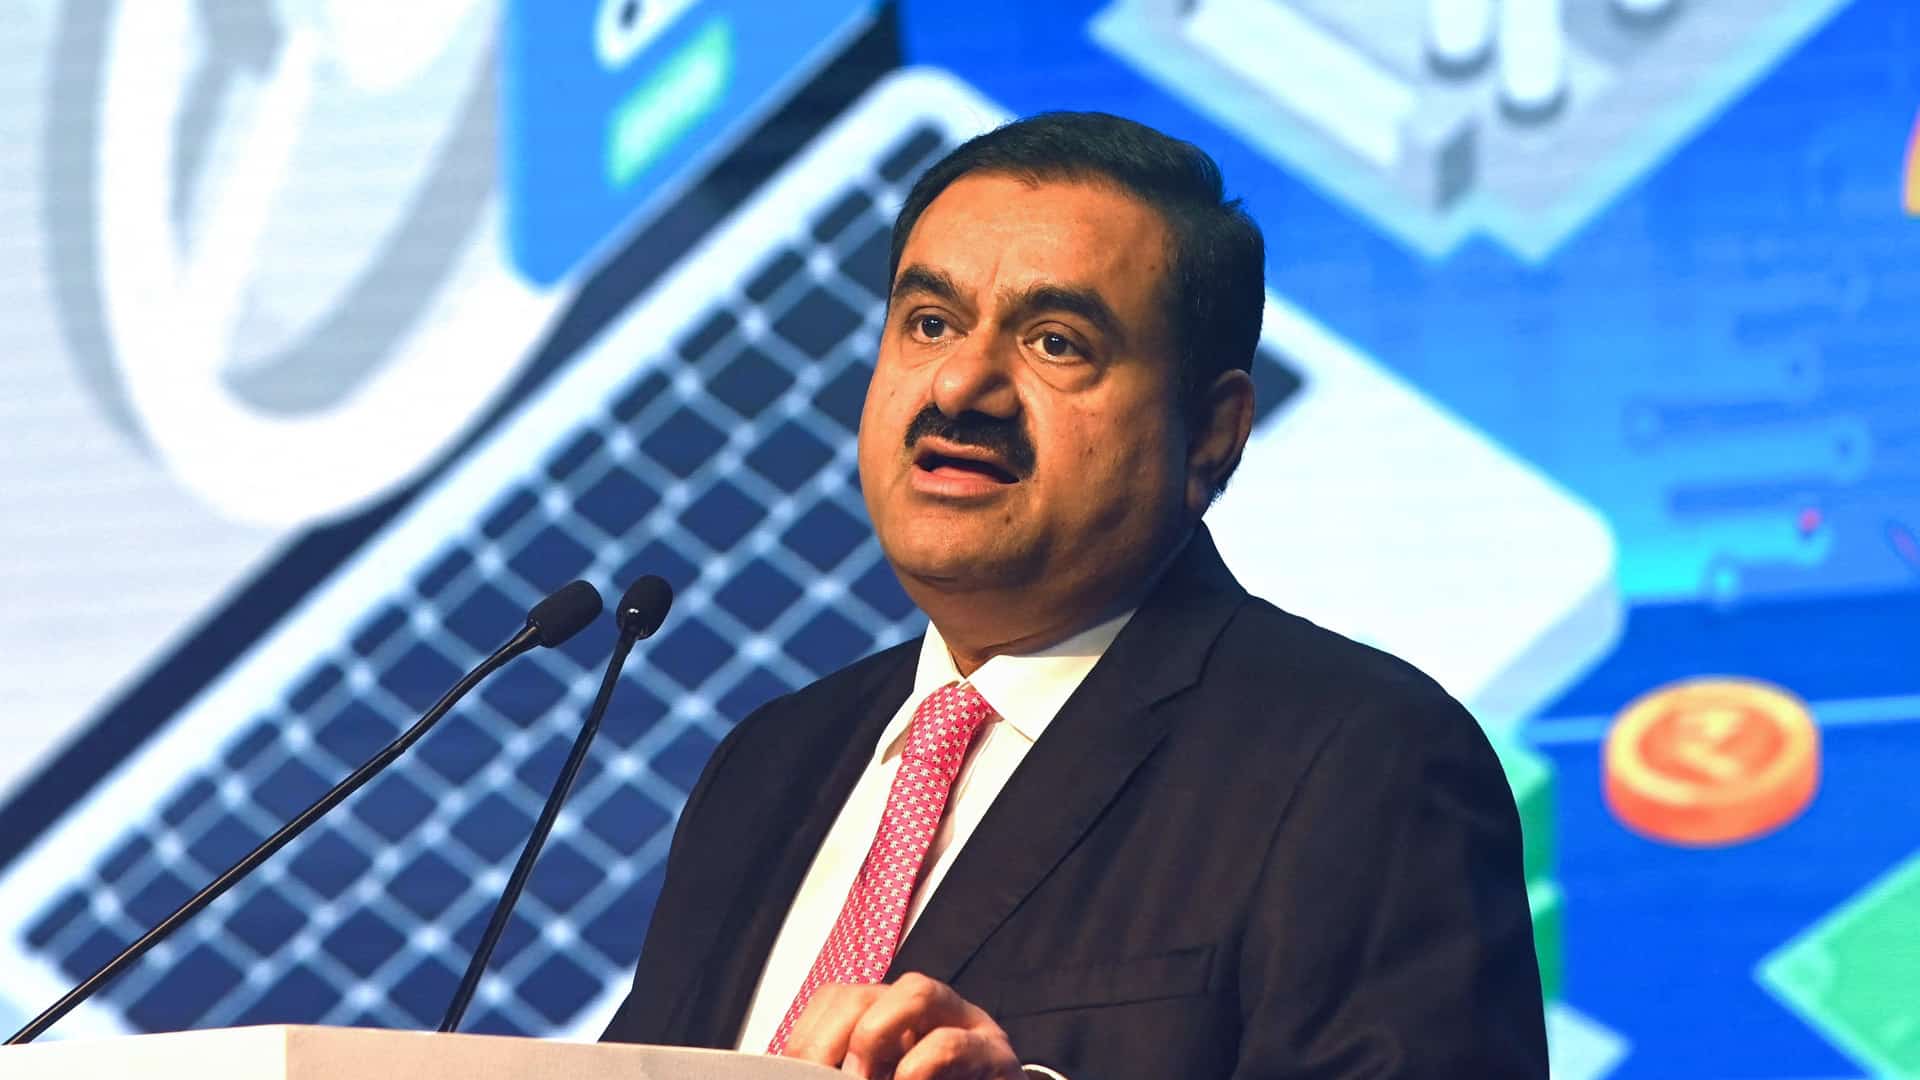 SBI's overall exposure to Adani Group at Rs 27,000 cr, says Chairman